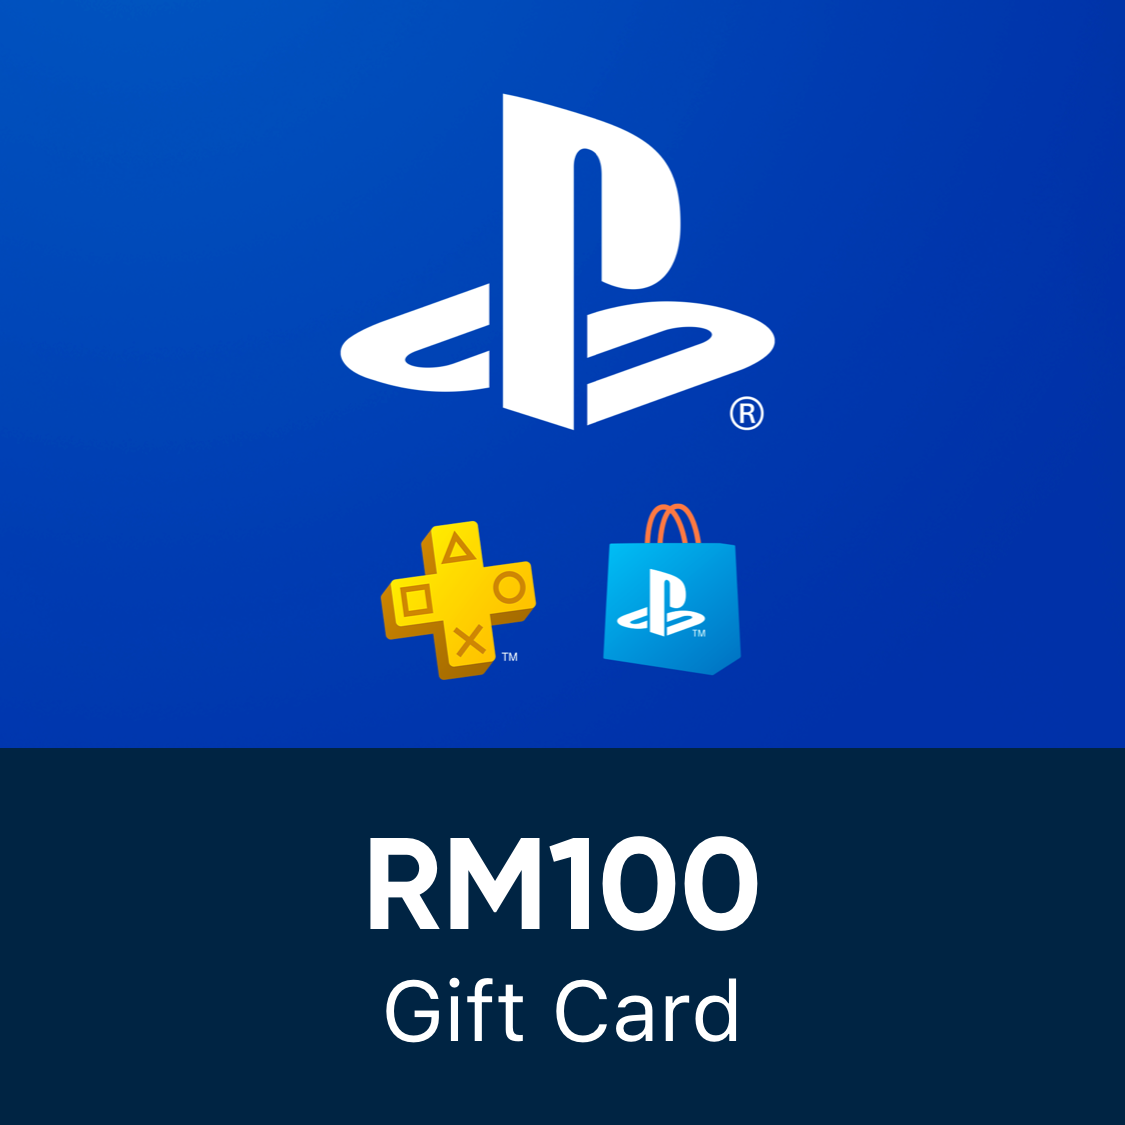 ps-rm100.png